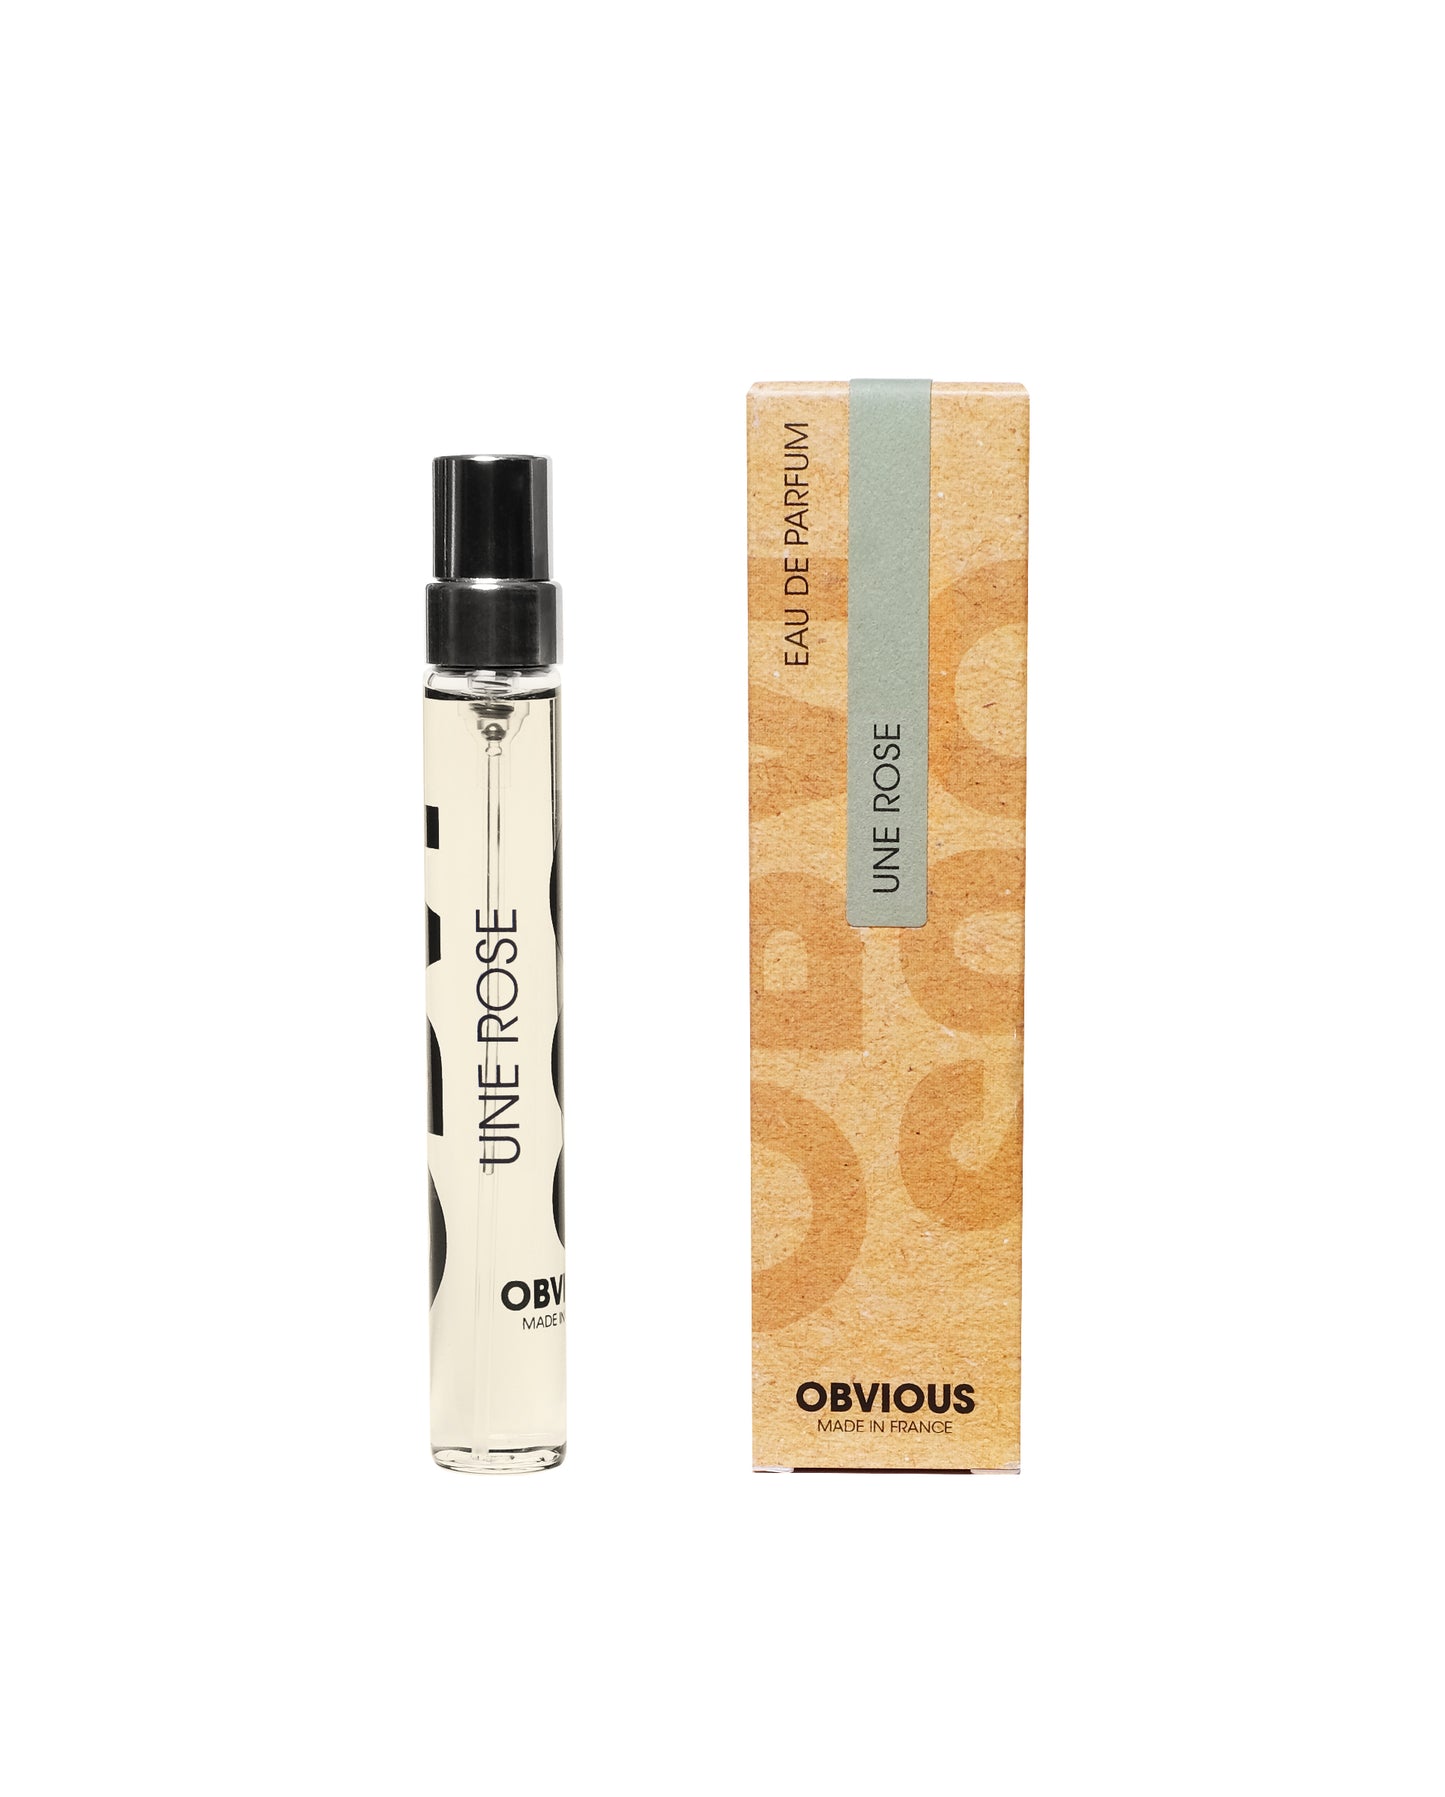 Obvious Parfums Une Rose 9ml